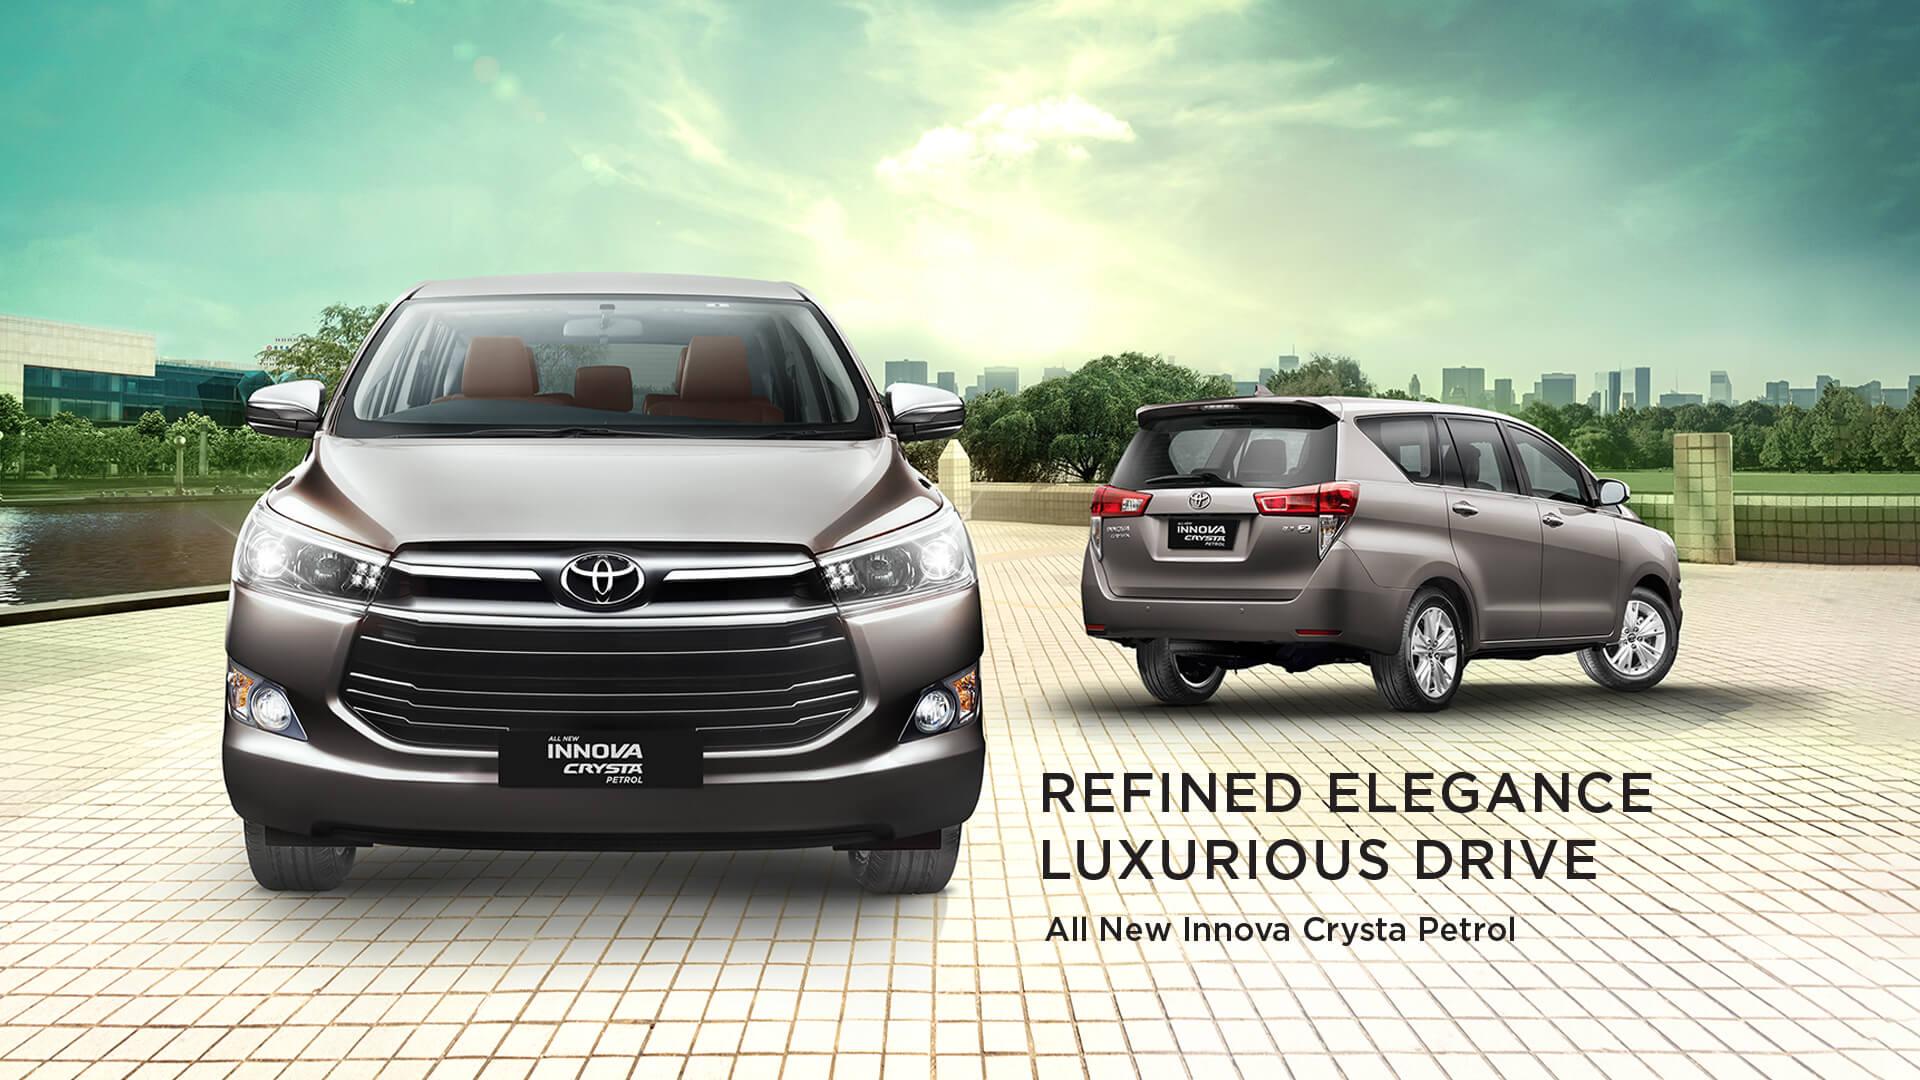 Toyota Innova. Official Toyota Innova Website for Your Bookings